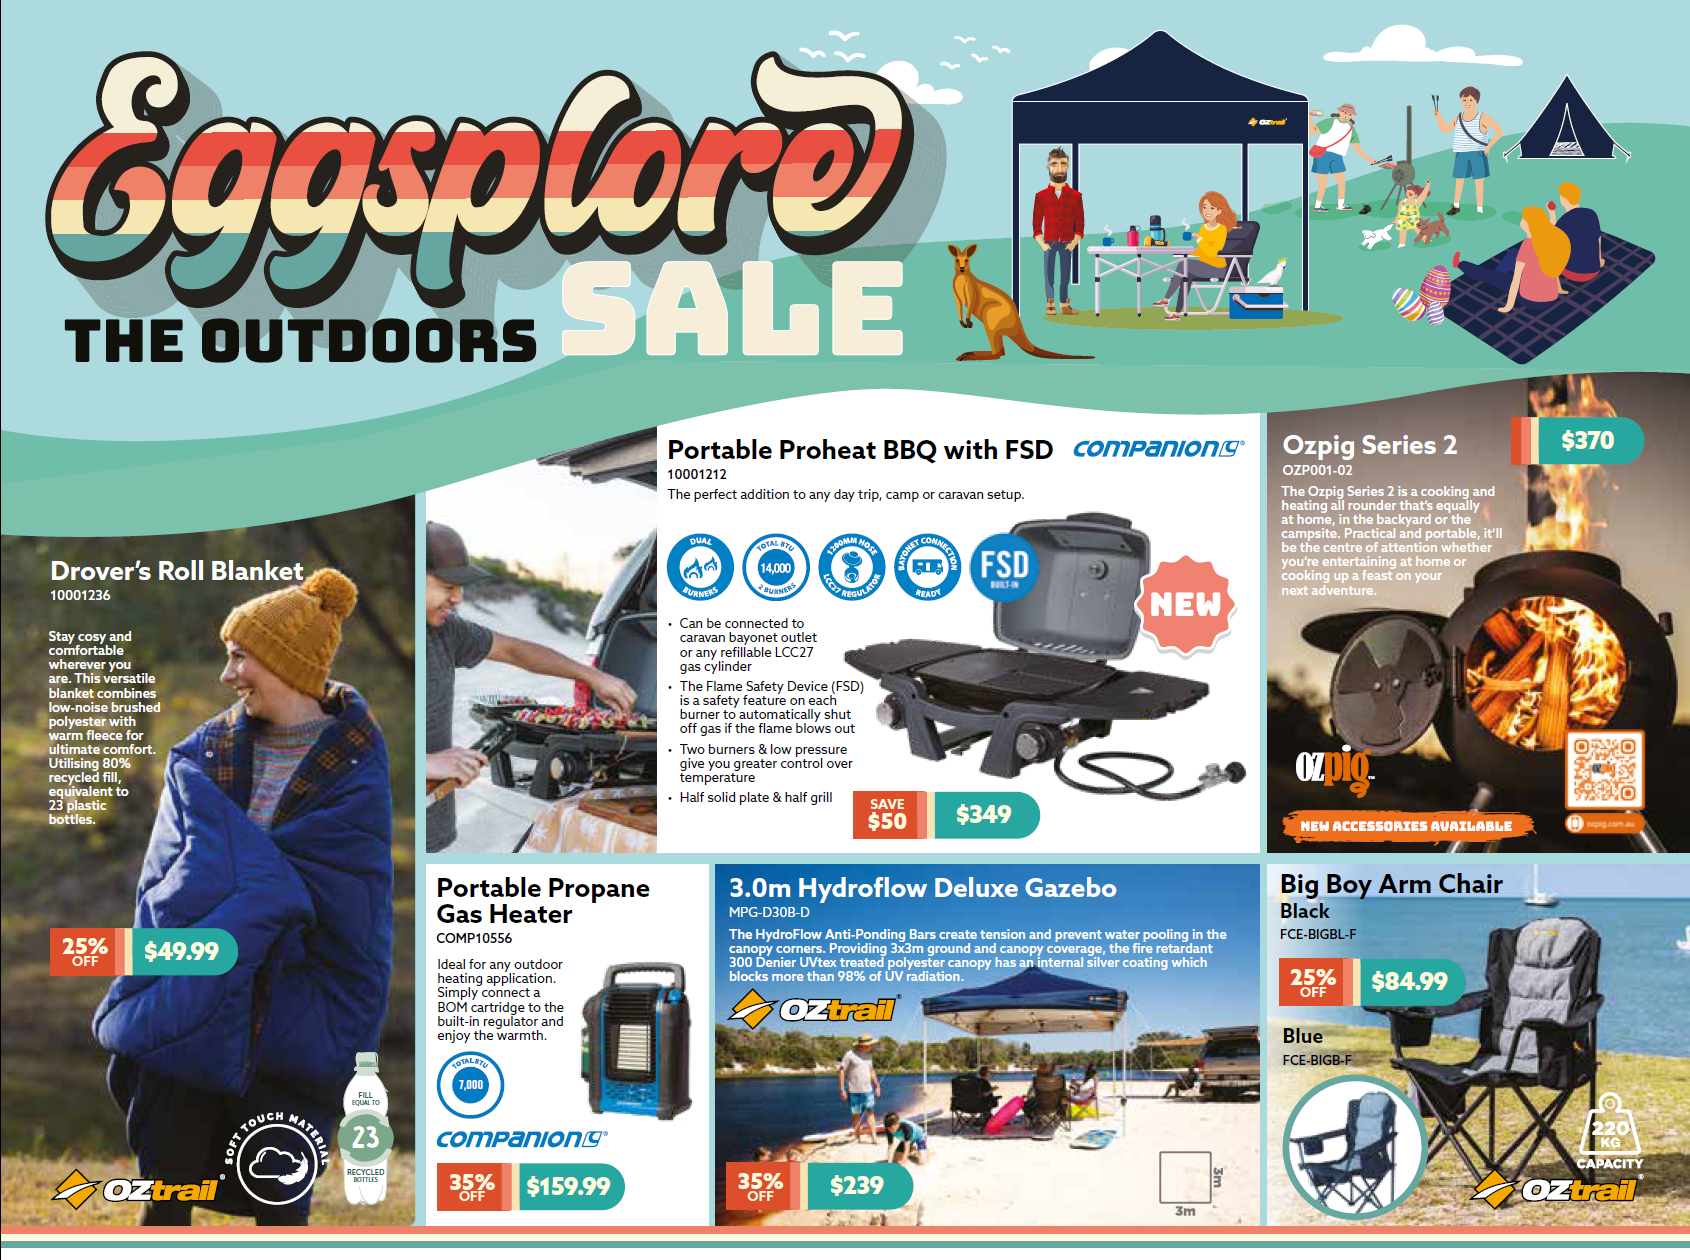 Eggsplore the Great Outdoors Sale Catalogue